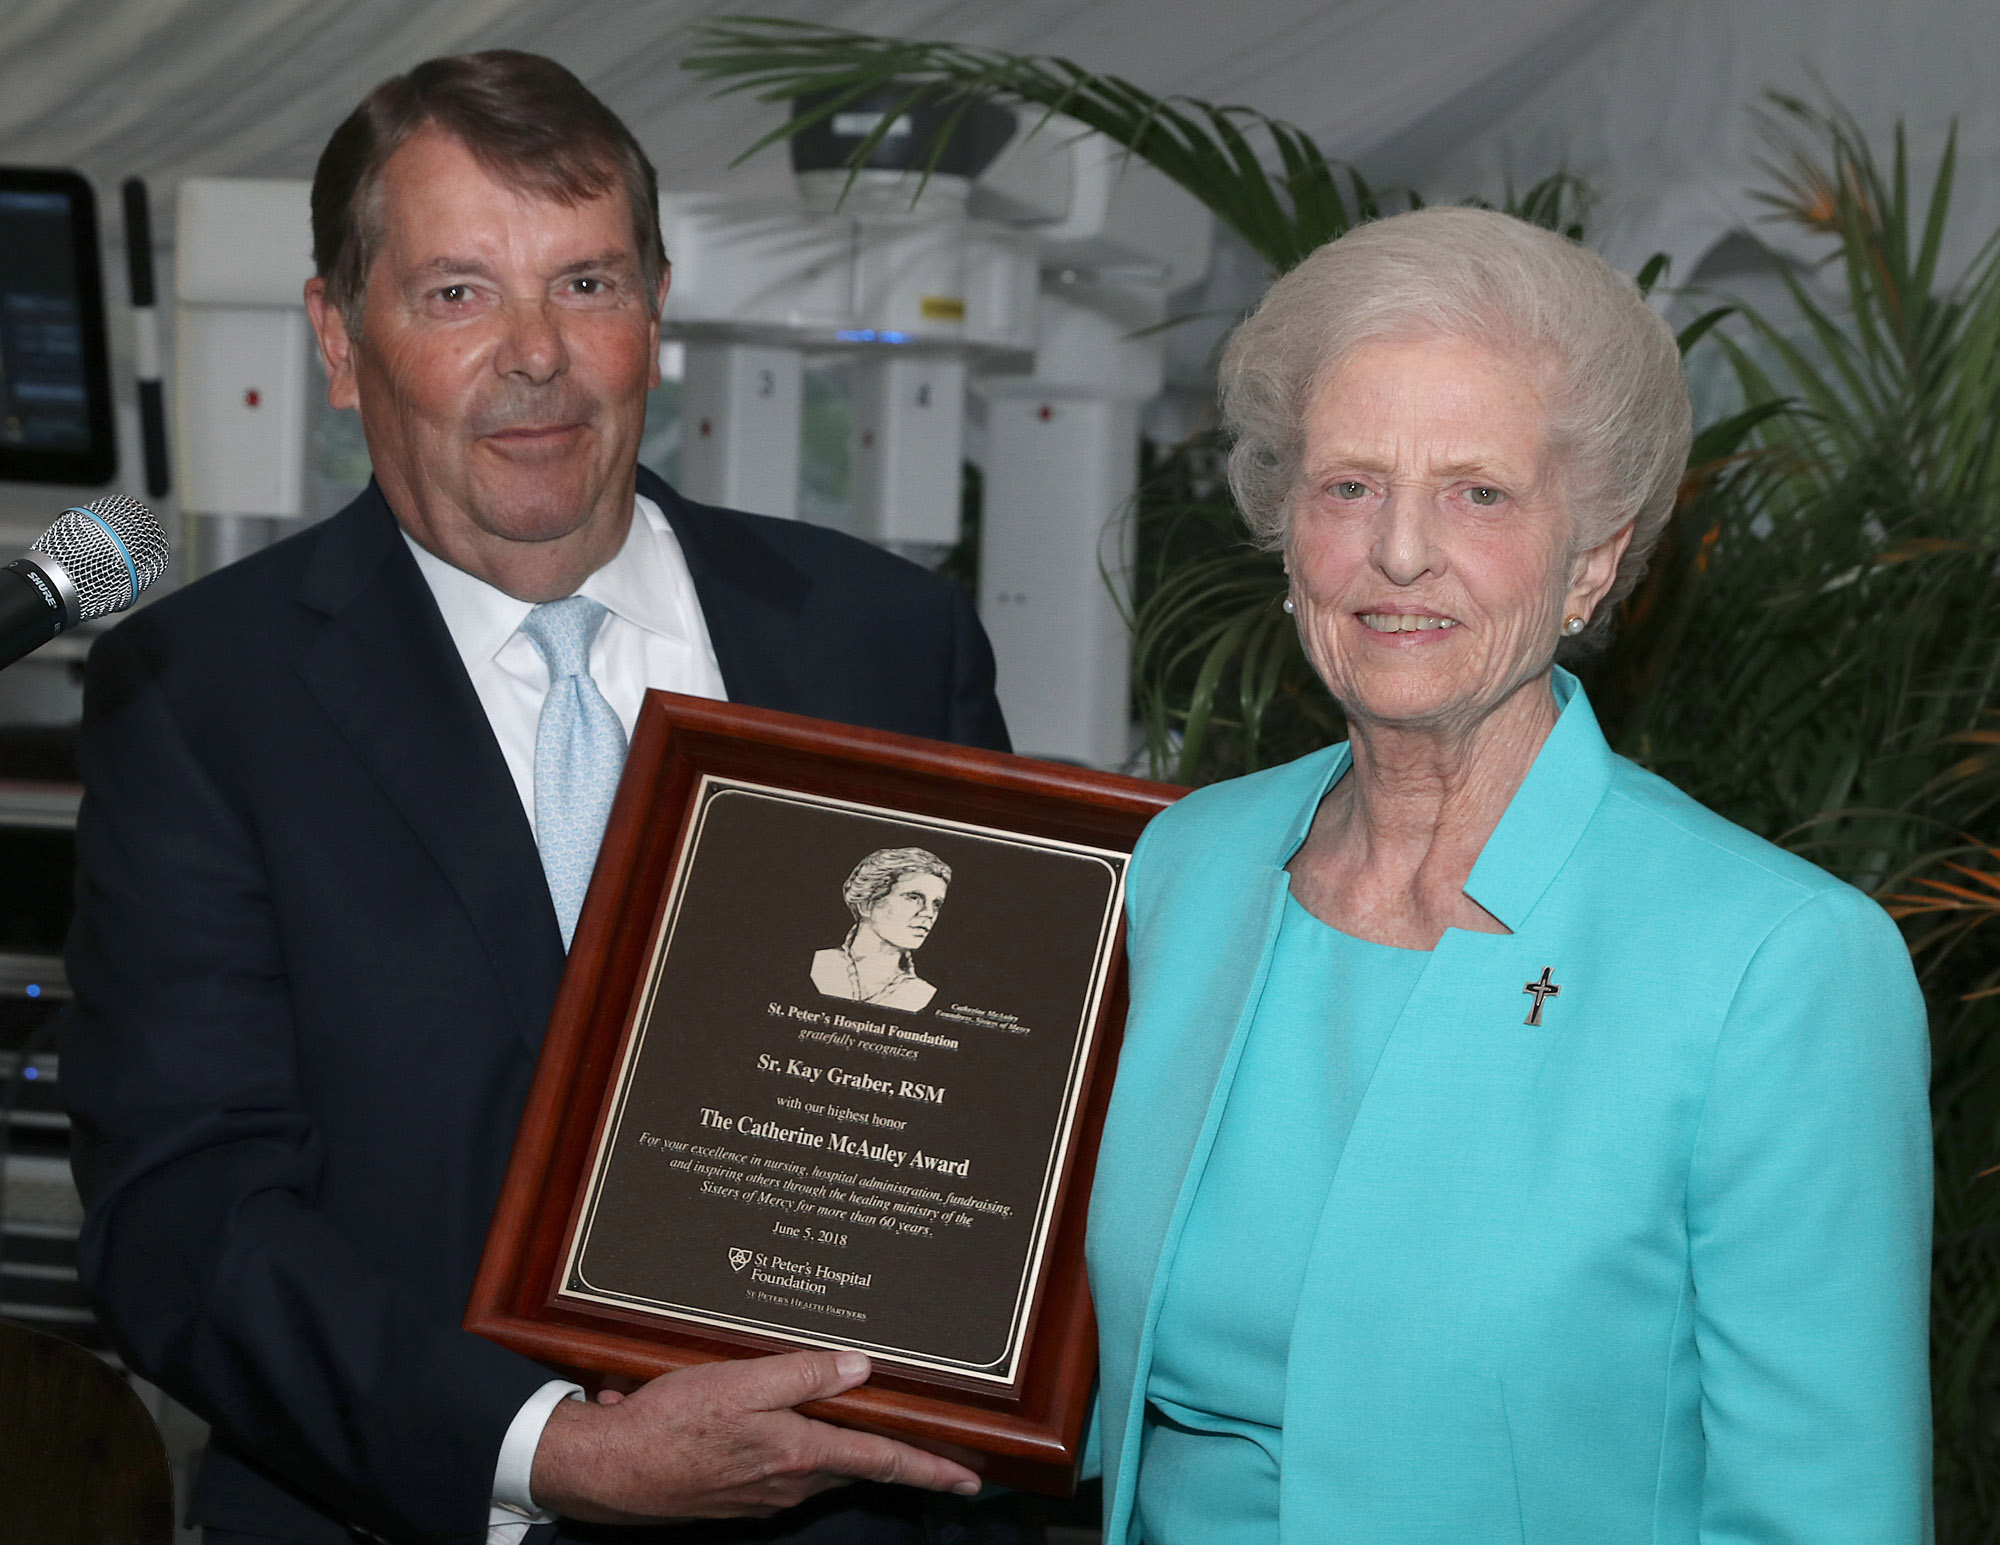 Sister Kay received the Catherine McAuley Award from St. Peter's Hospital Foundation on June 5, 2018, from Thomas Tyrrell, Foundation chair, for furthering the hospital's Mercy mission. (Photo via: Joe Putrock/Special to the Times Union)